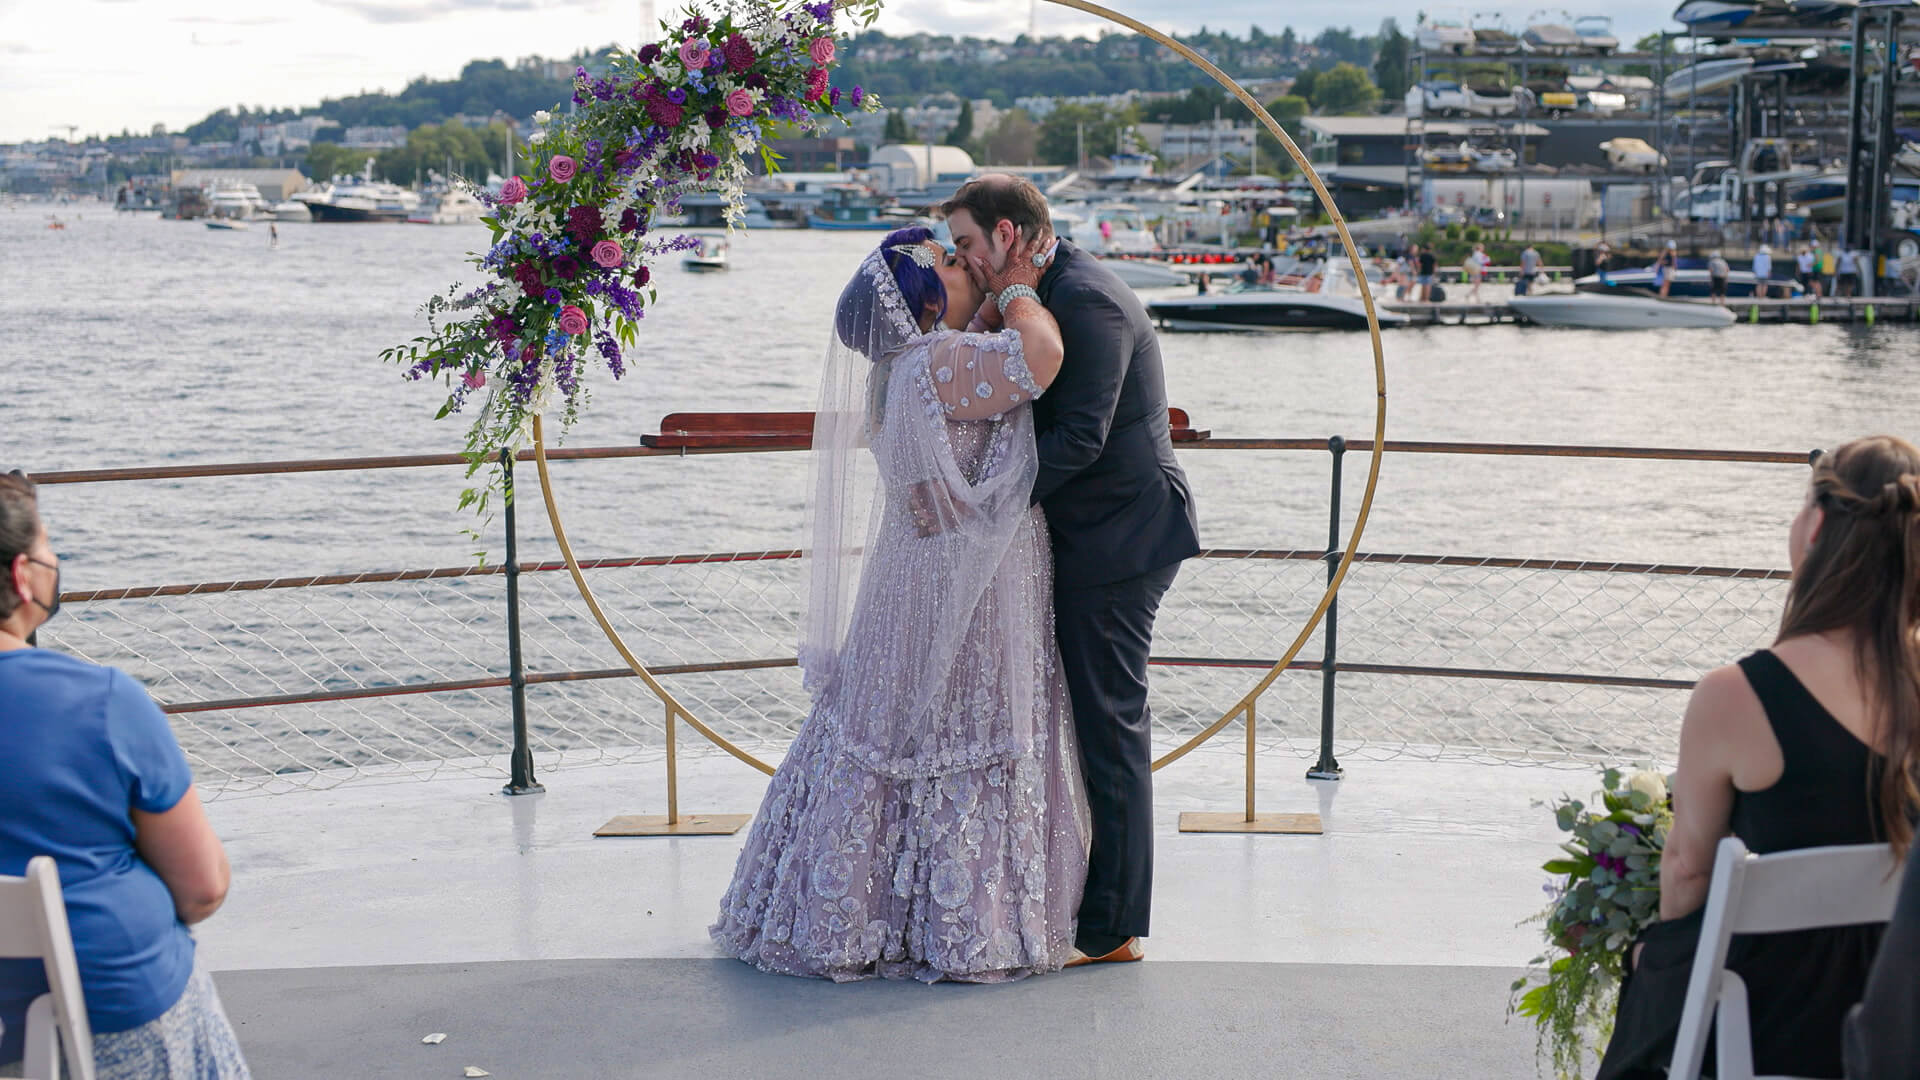 Lake Union Wedding Venue with best Sunset View in Seattle